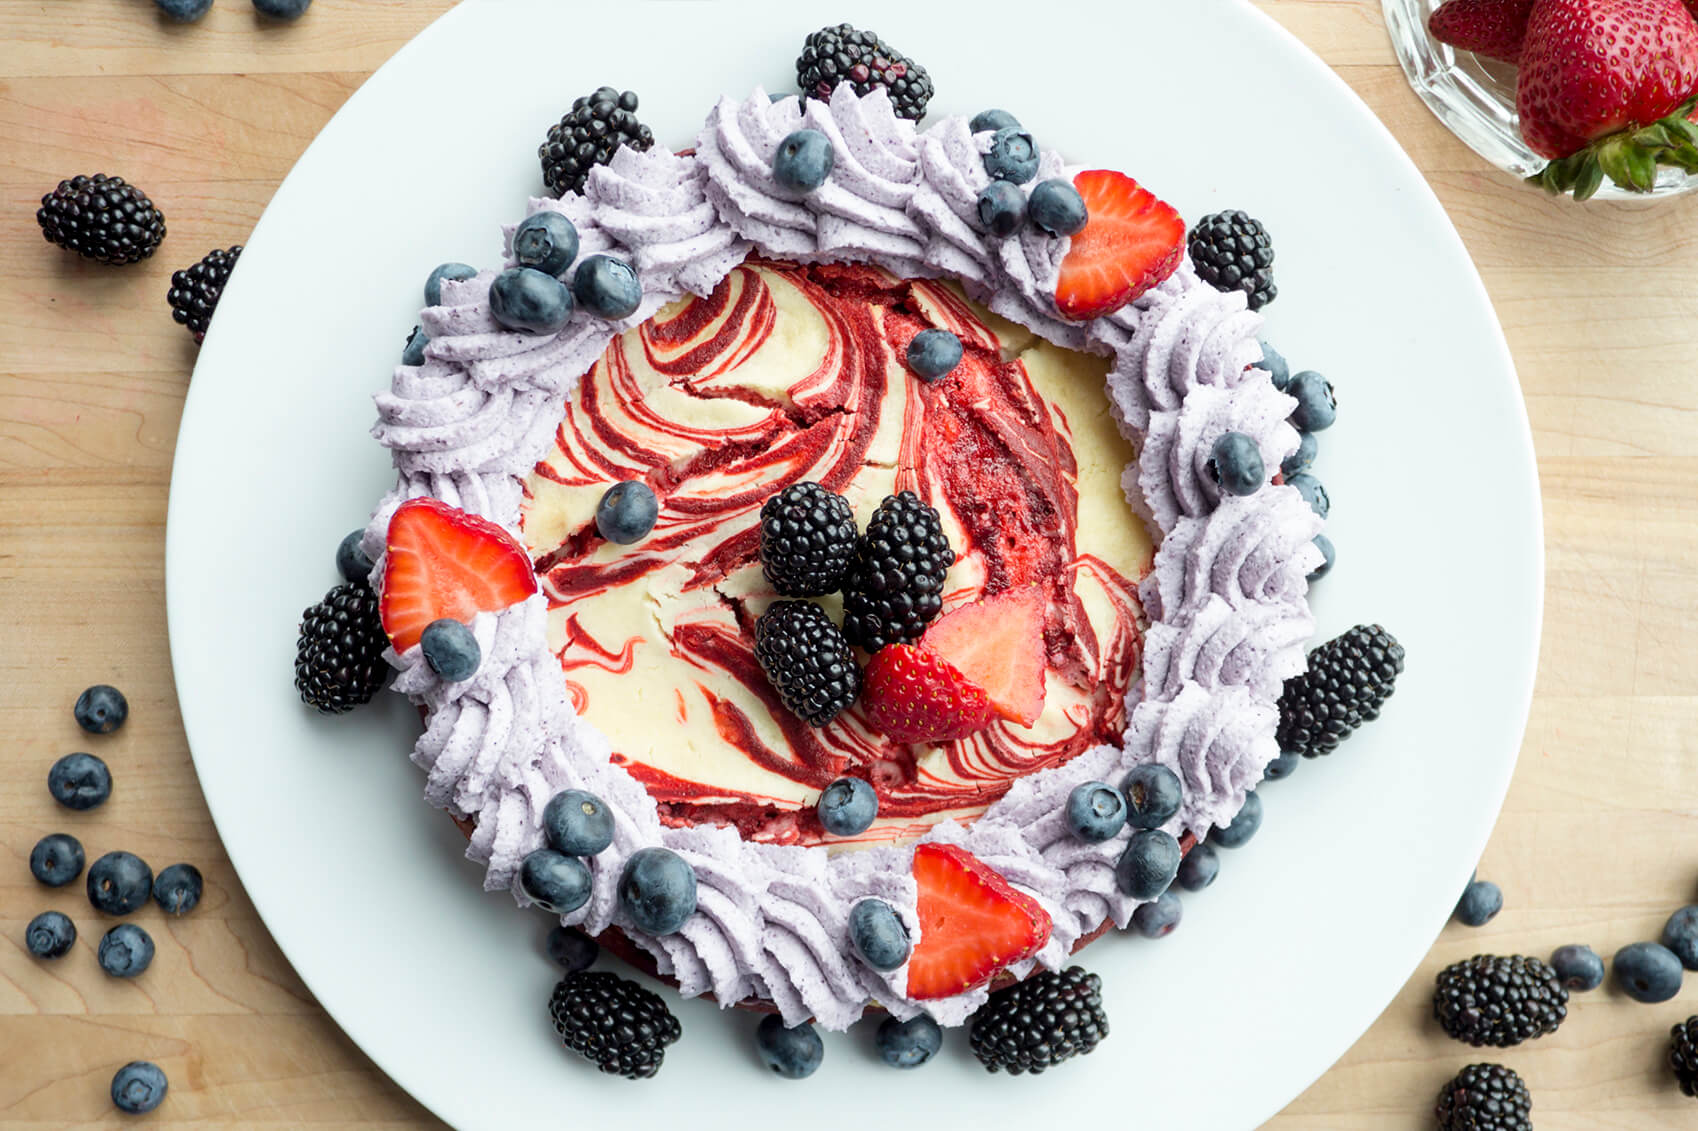 Embrace your patriotic spirit with this delicious red velvet and blueberry cheesecake recipe